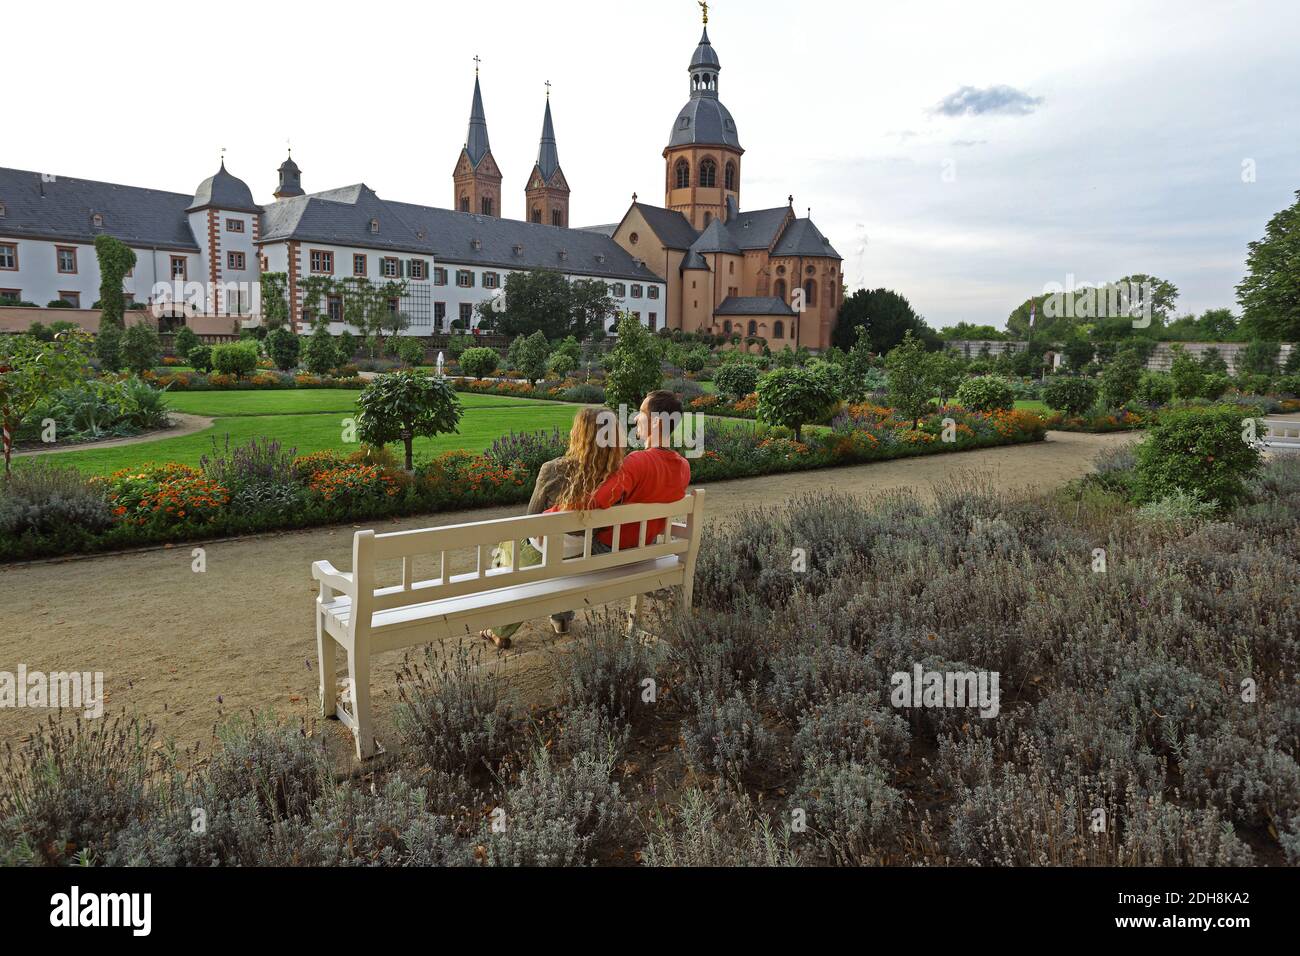 Young couple sitting on a bench and enjoy the convent garden and basilica in Seligenstadt on the Banks of the River Main, Germany Stock Photo